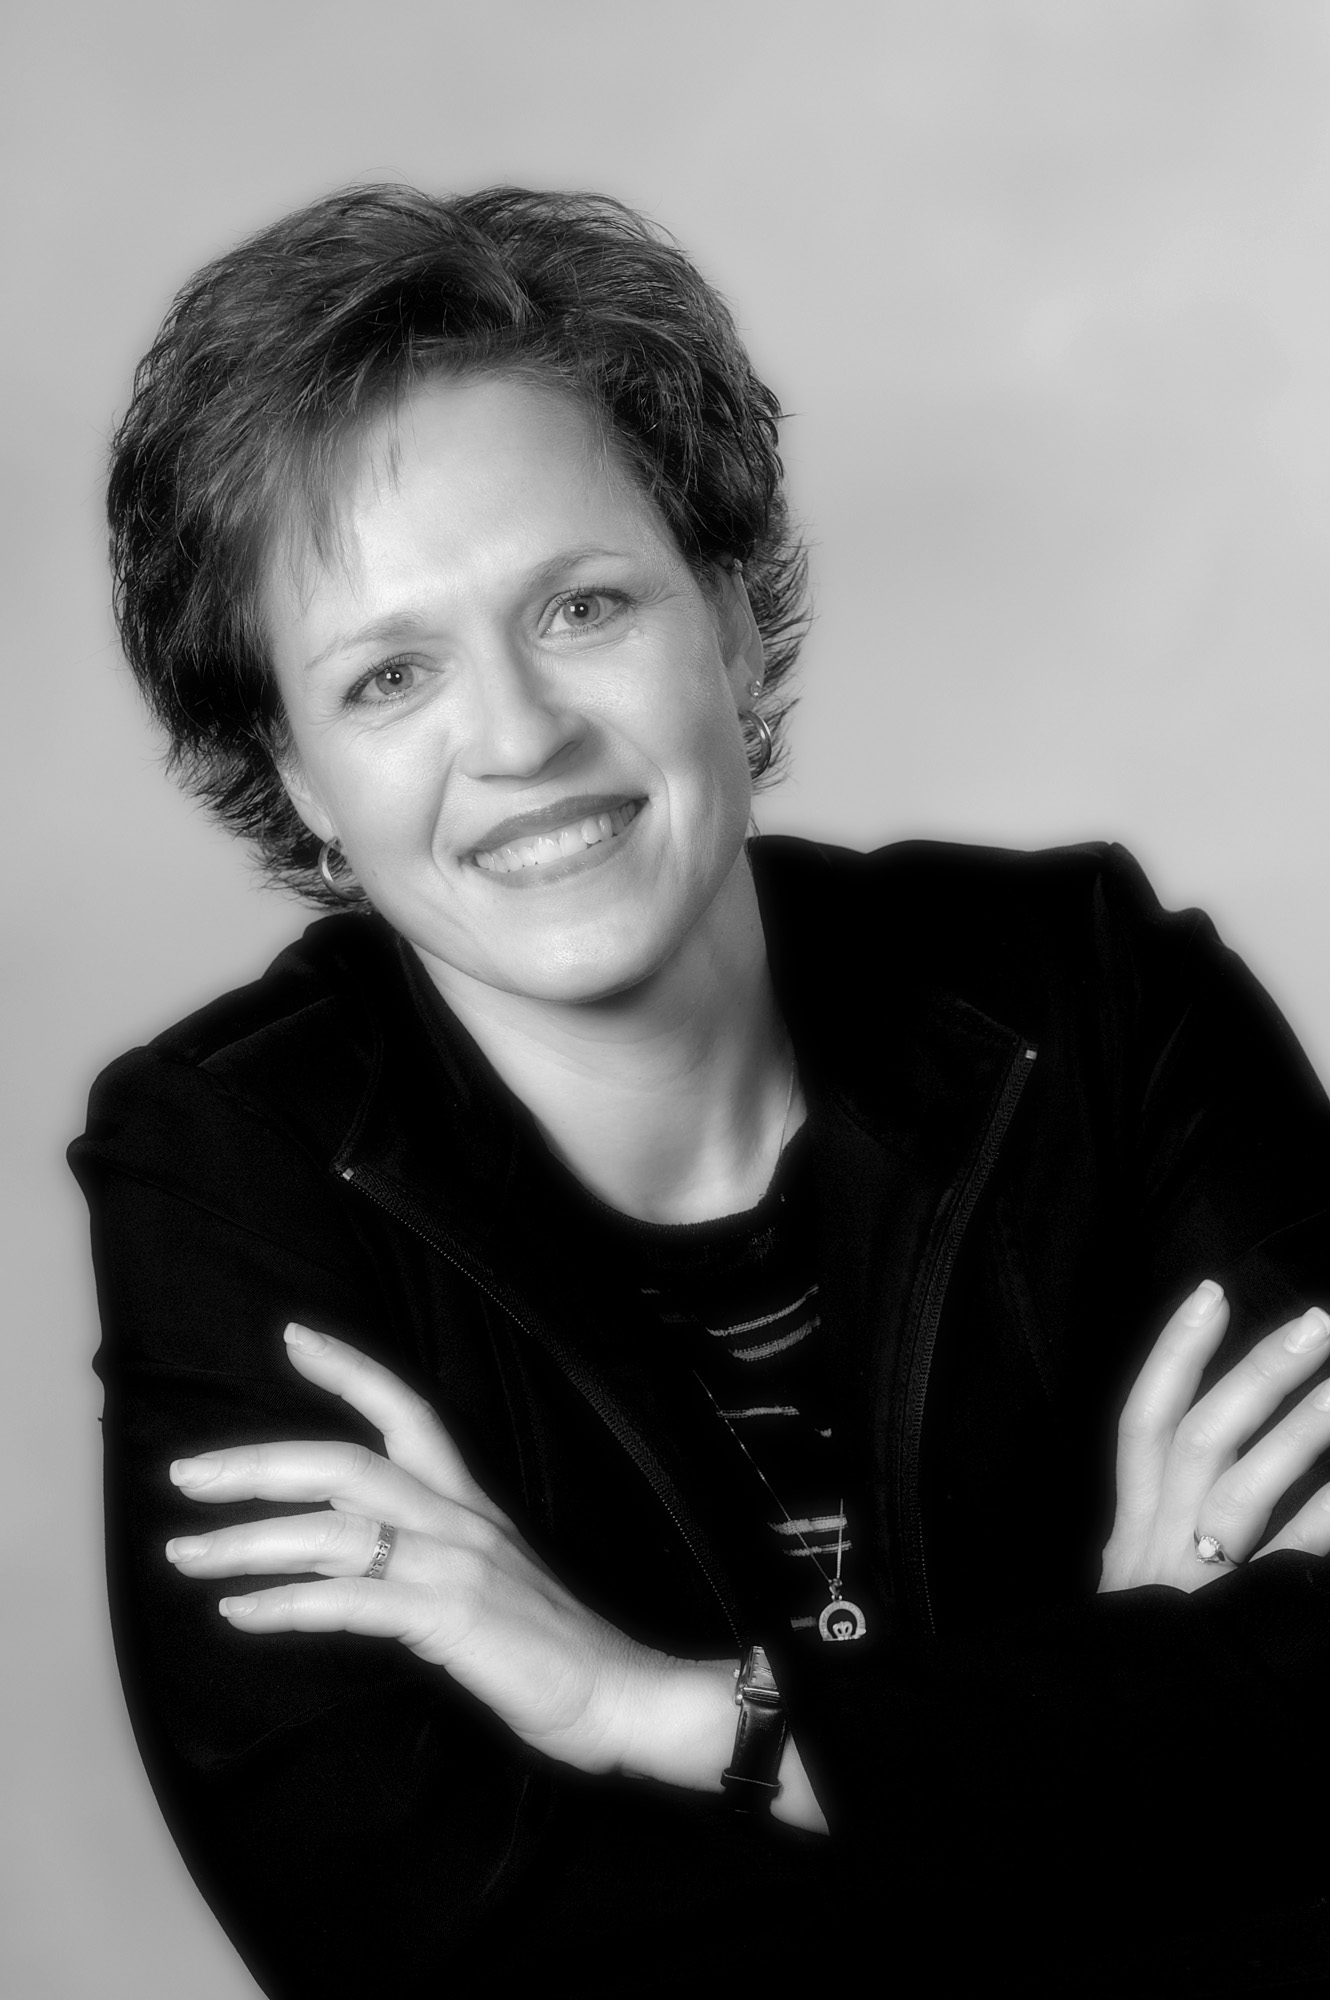 casual portrait of Owens Corning business woman in black and white